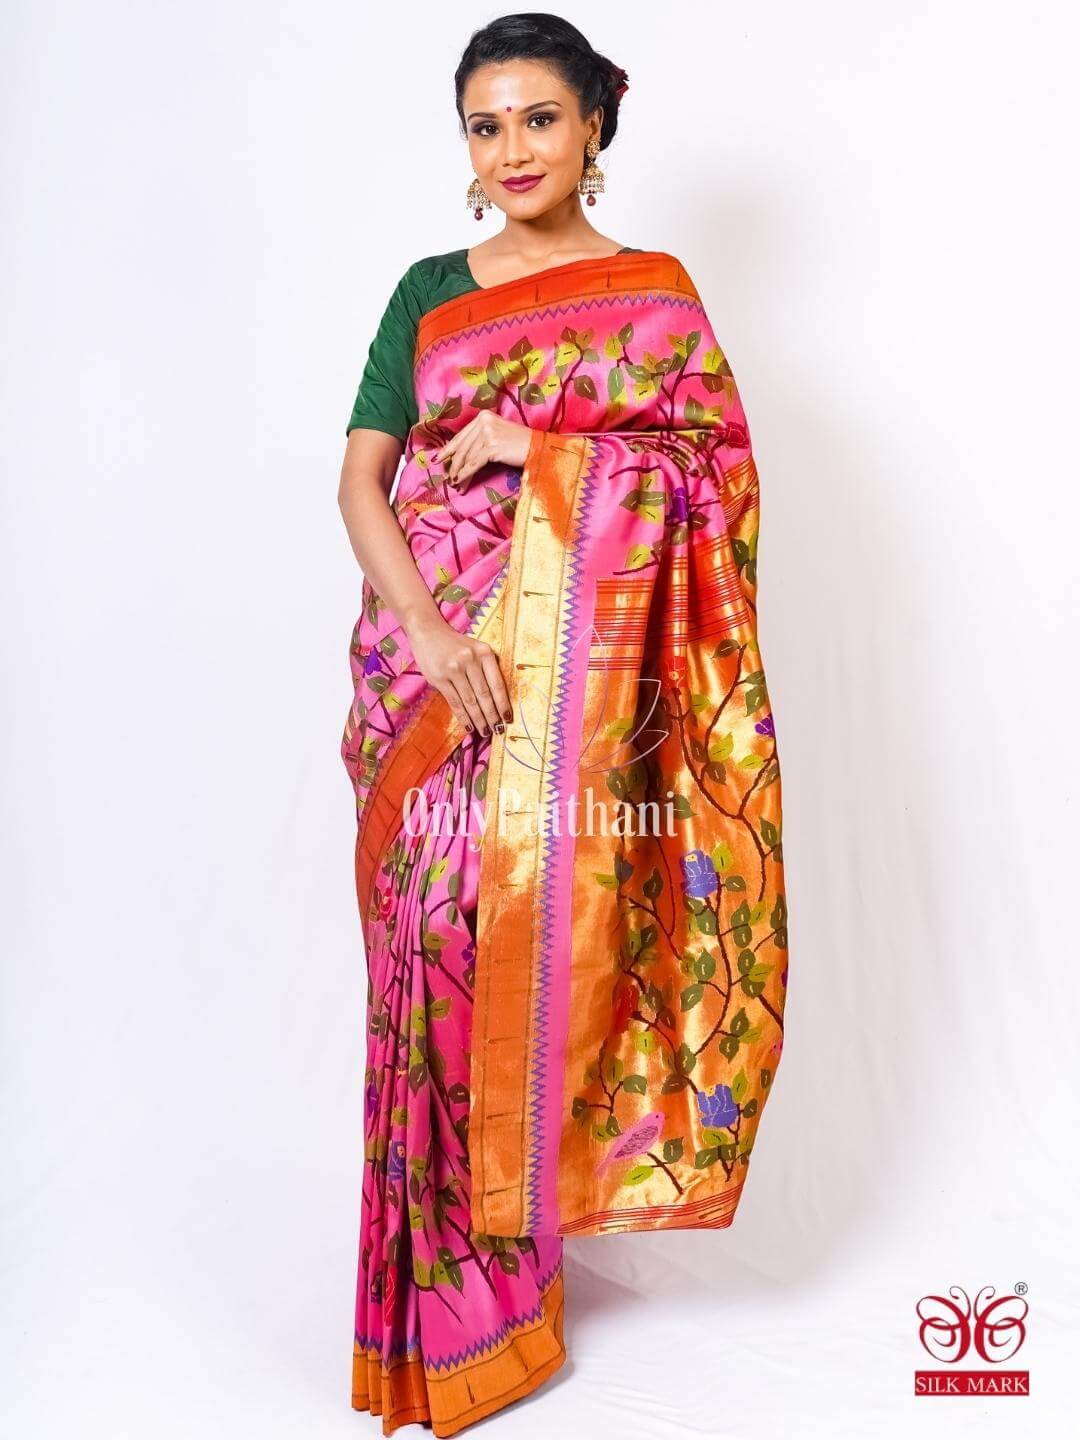 Baby pink all over pure silk paithani saree